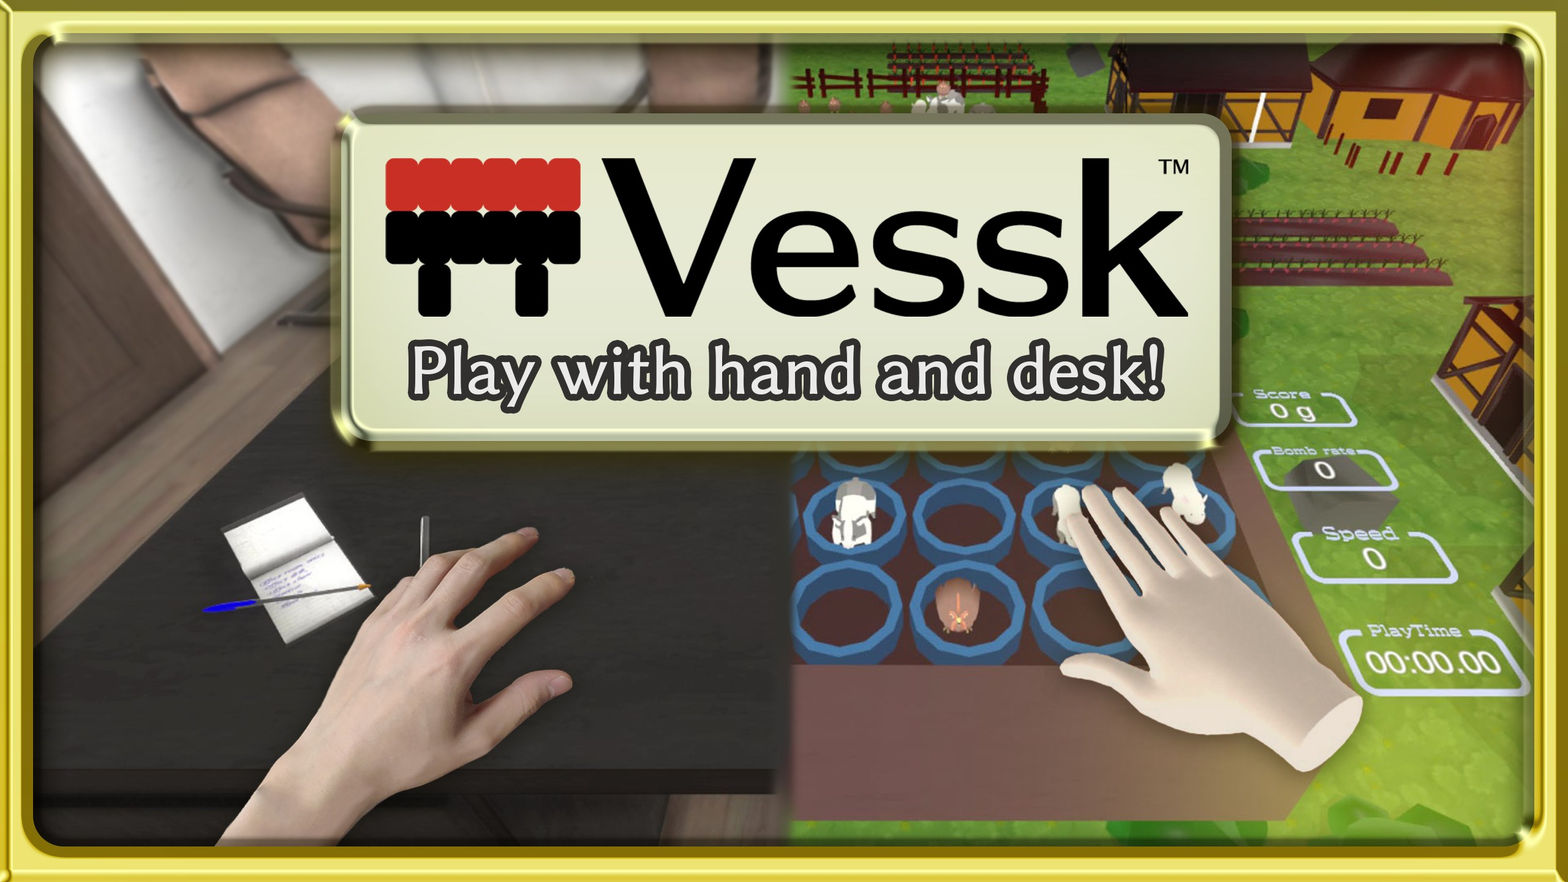 Vessk: Play with hand and desk!